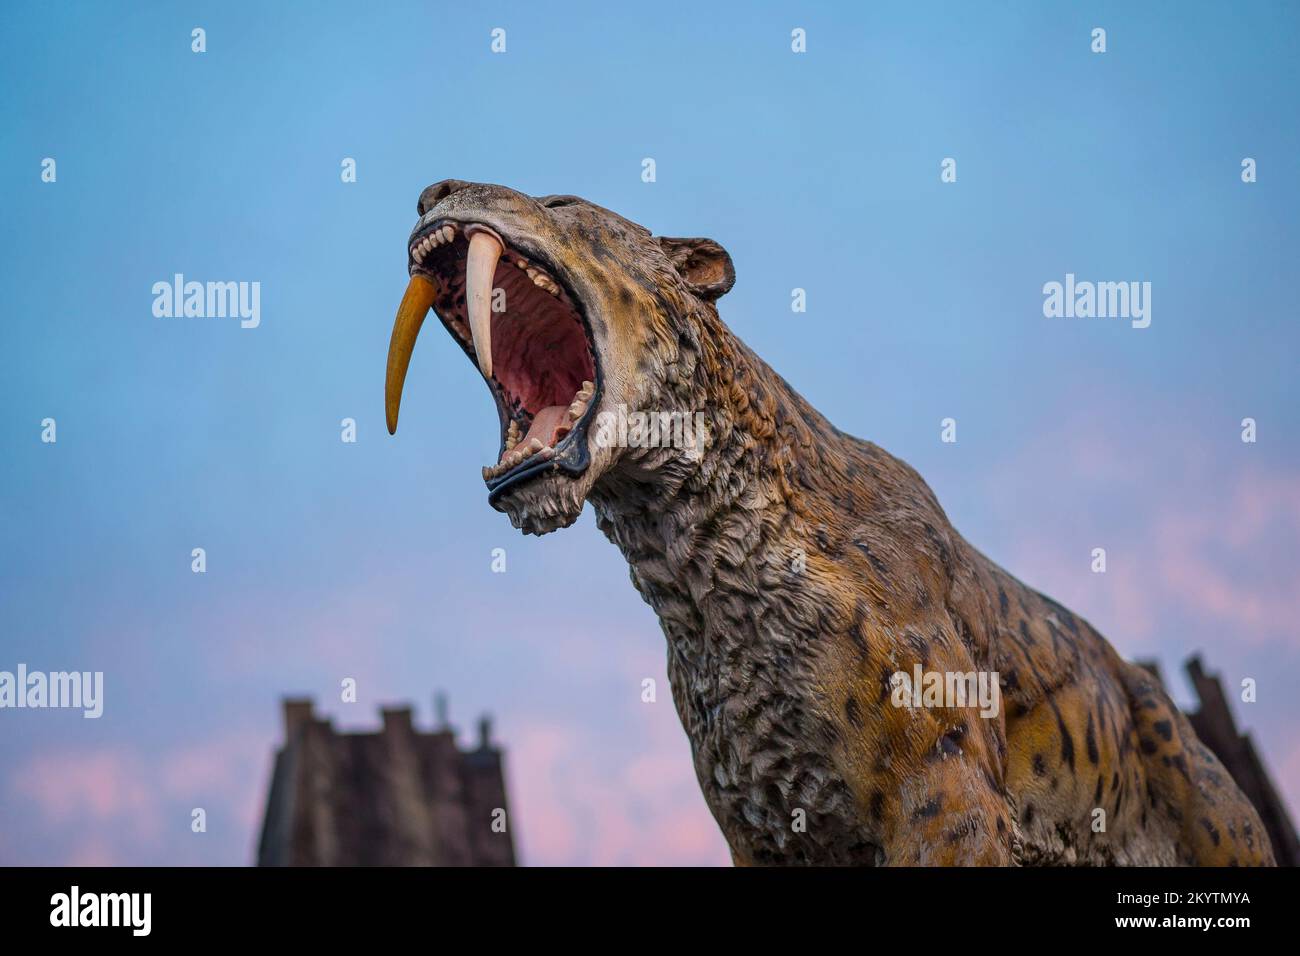 Land of the Living Dinosaurs at West Midlands Safari Park: side view of the ferocious sabre-toothed cat/ tiger (smilodon), jaw wide open. Stock Photo